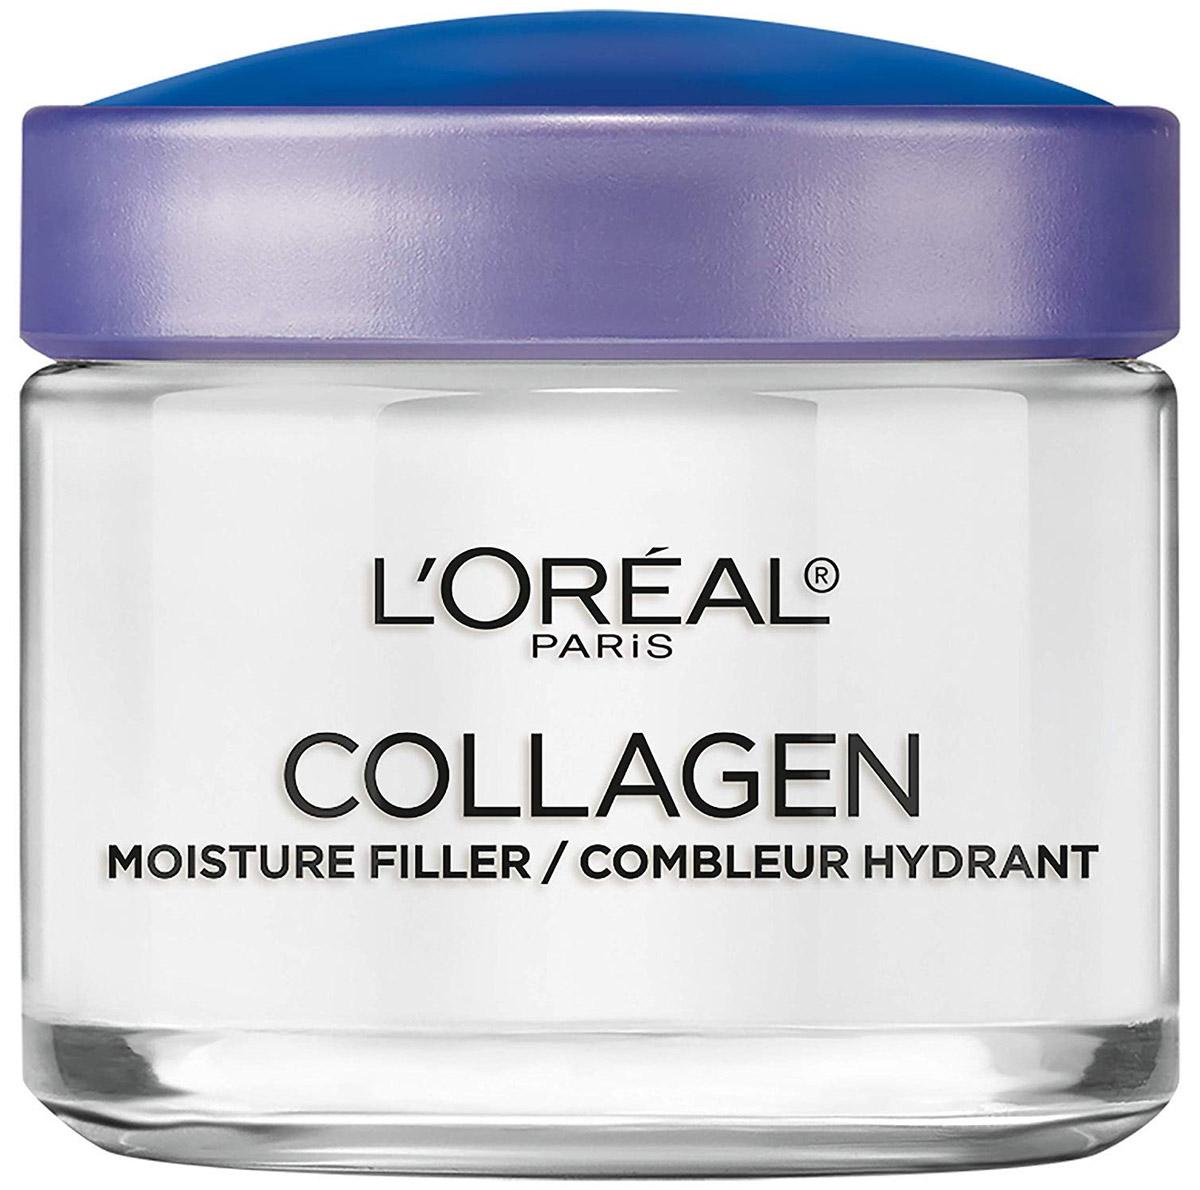 LOreal Paris Collagen Daily Face Moisturizer for $7.18 Shipped